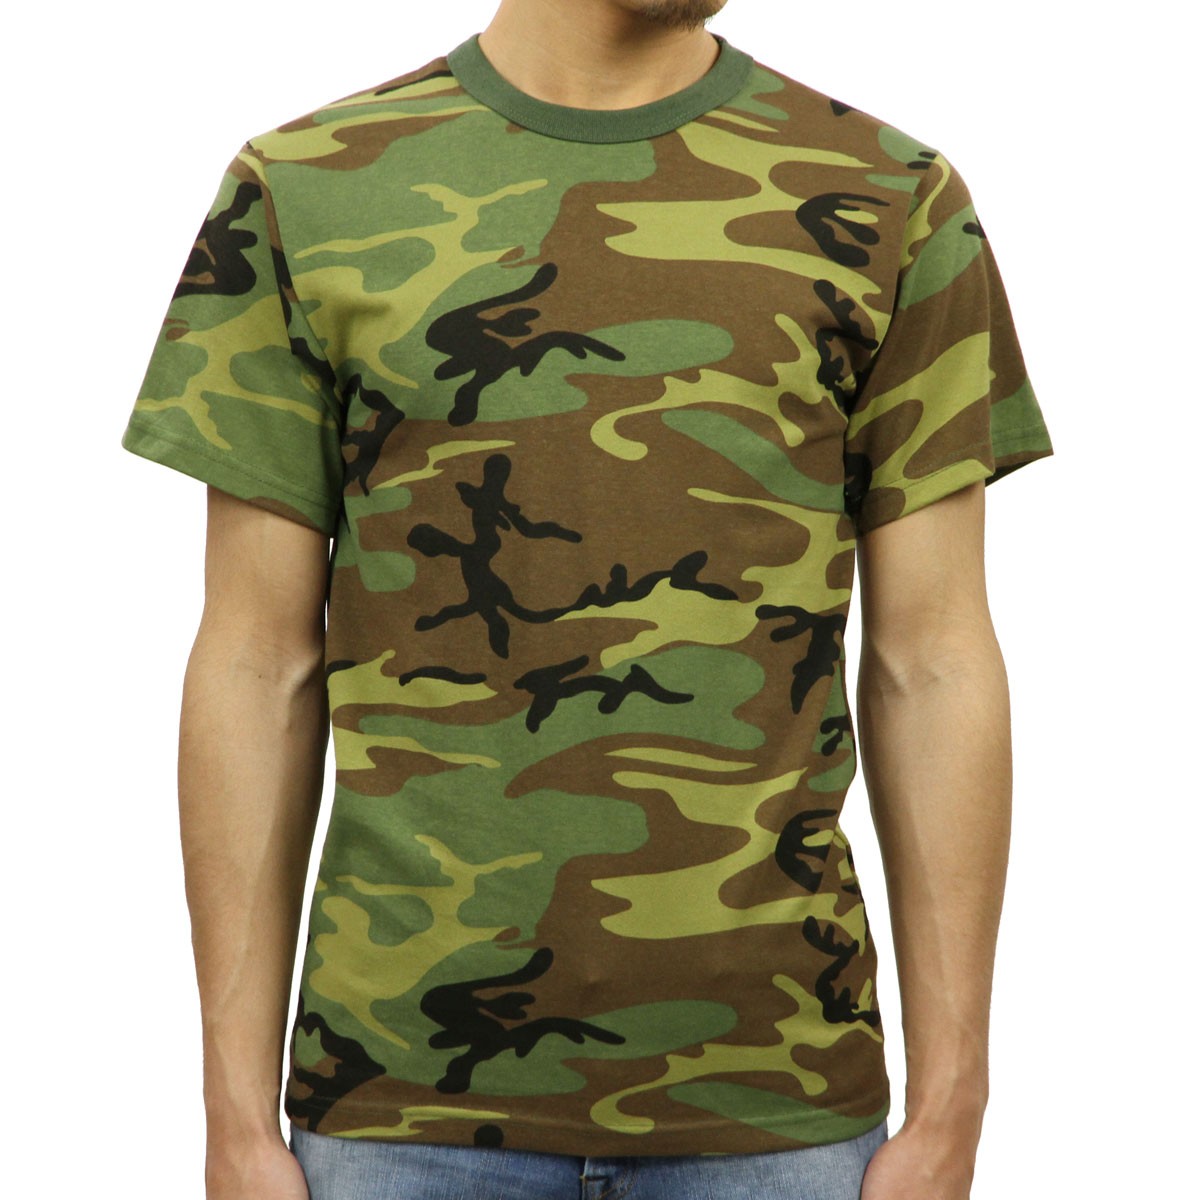  ROTHCO   ȾµT Woodland Camouflage T-Shirt 8777